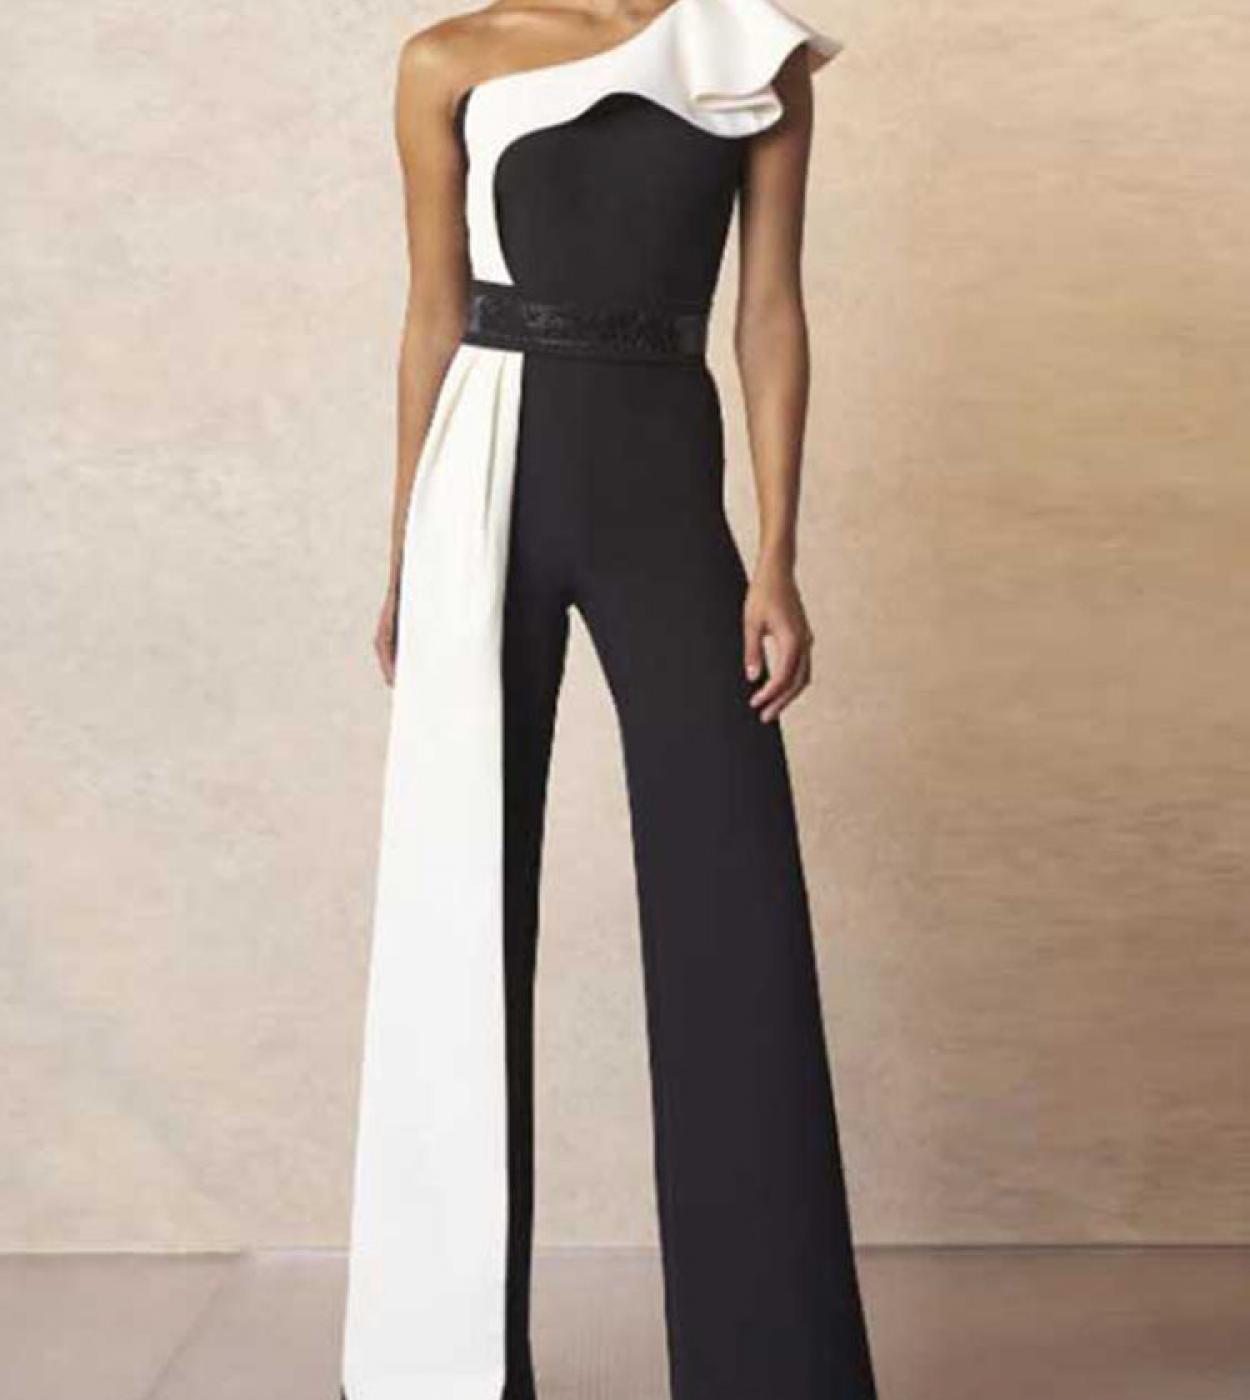 Black White Colorblock One Shoulder Sleeveless Straight Jumpsuit Without Belt